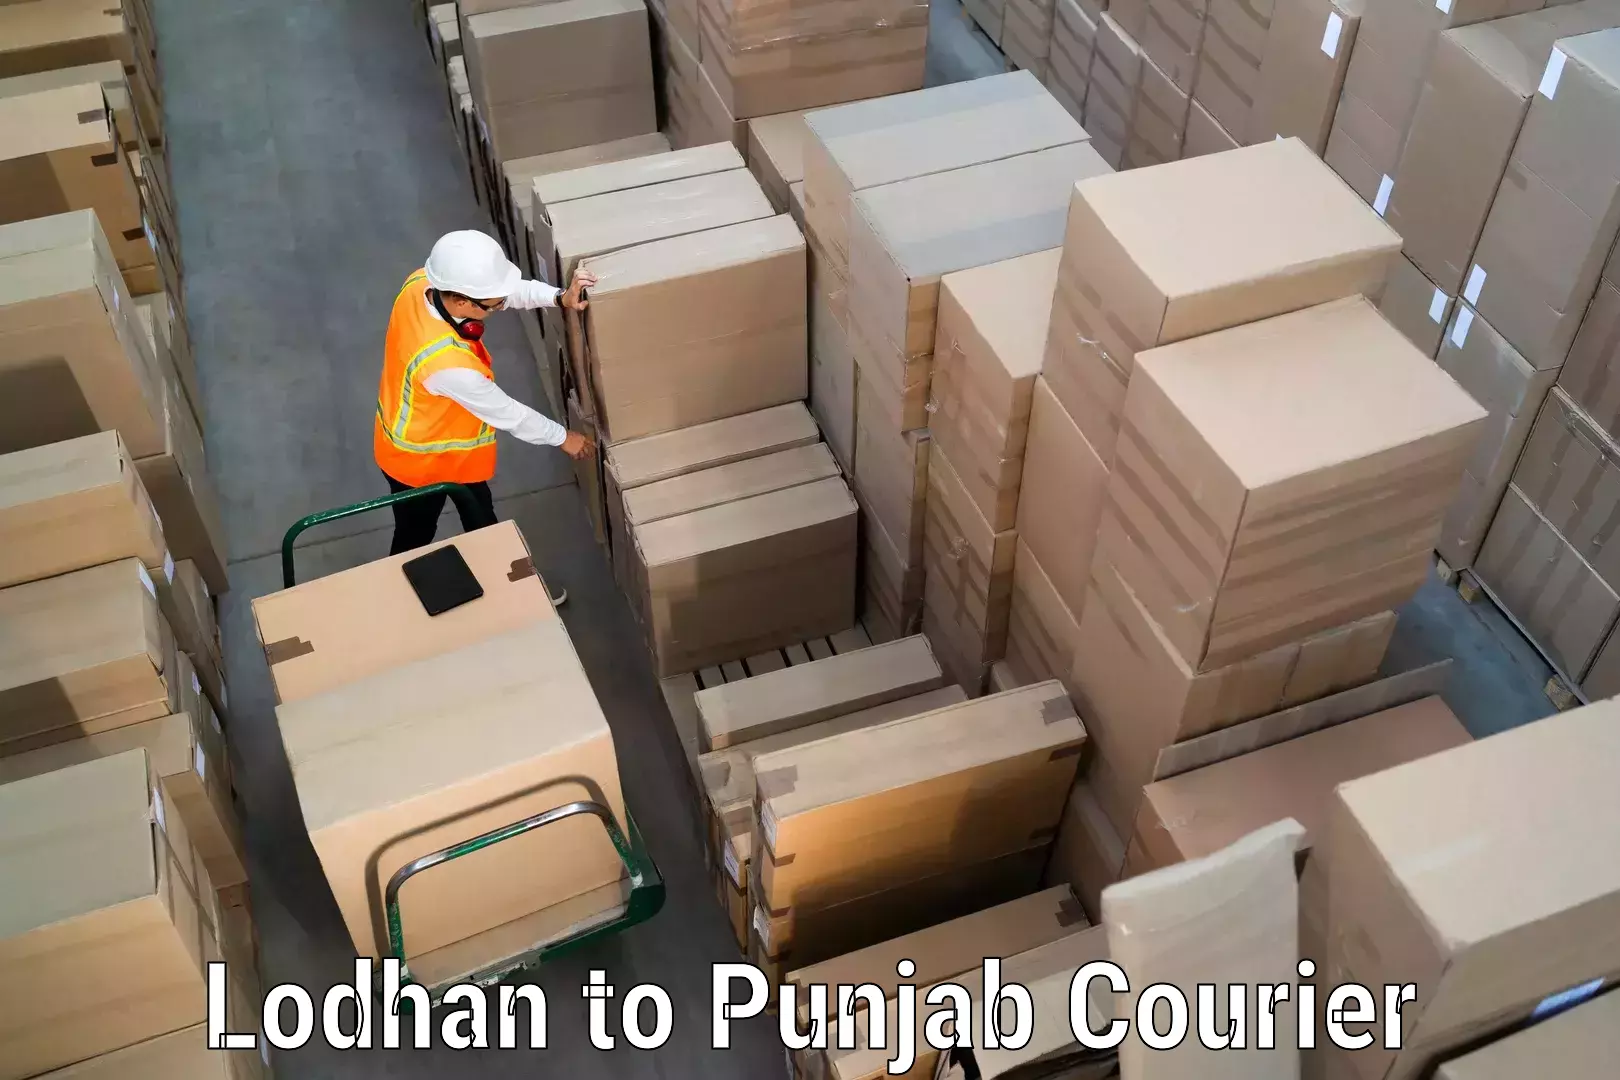 Cost-effective courier solutions Lodhan to Ludhiana